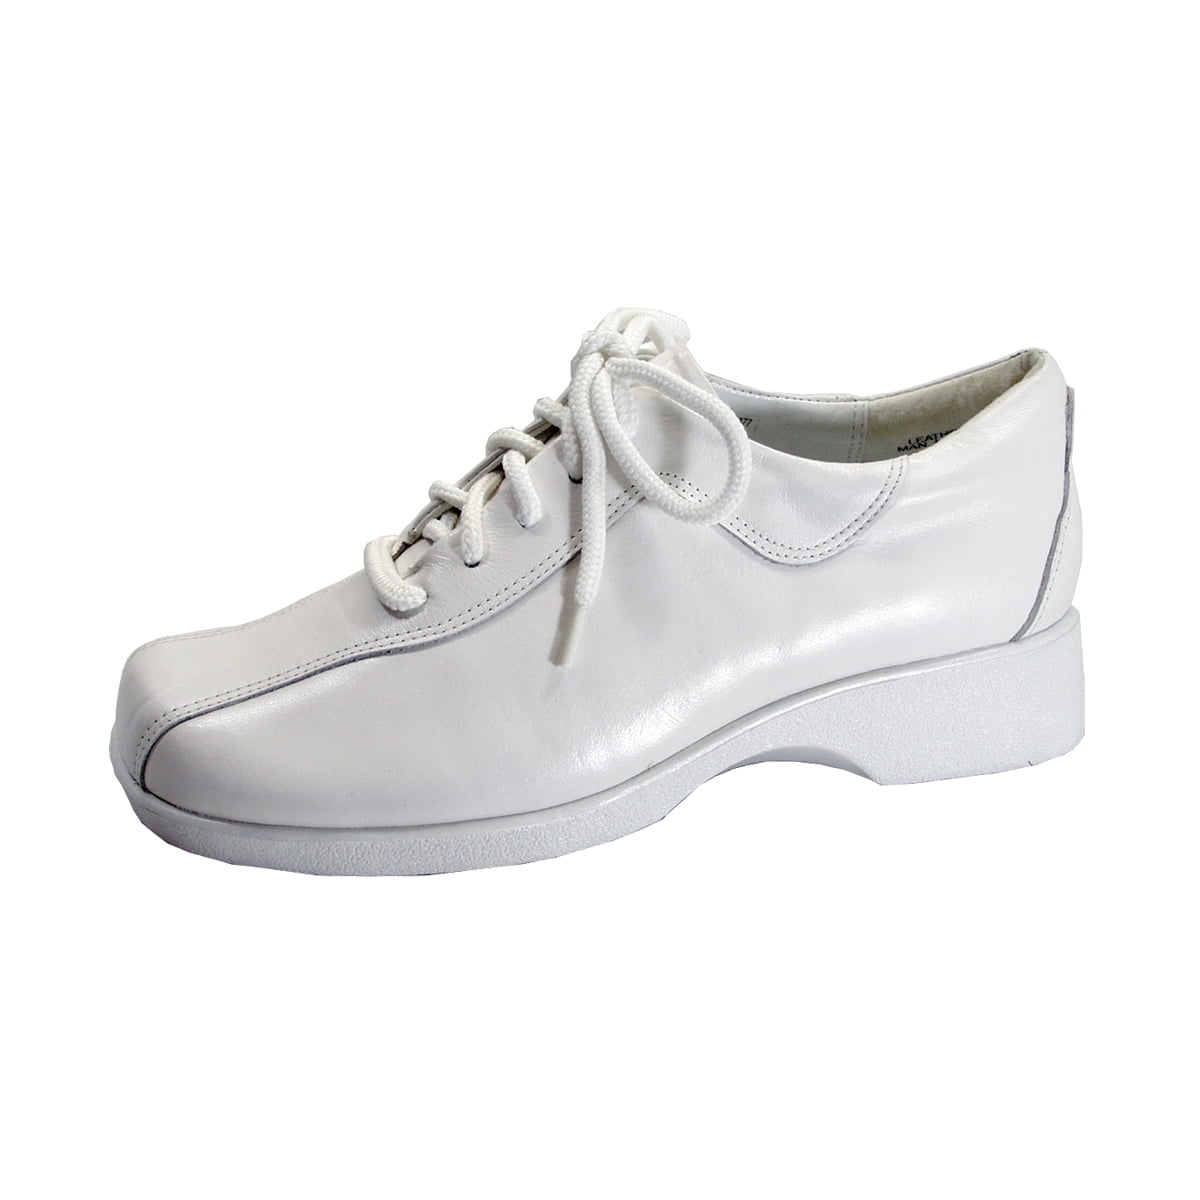 24 HOUR COMFORT Caprice Width Leather Lace-Up Shoes WHITE Walmart.com